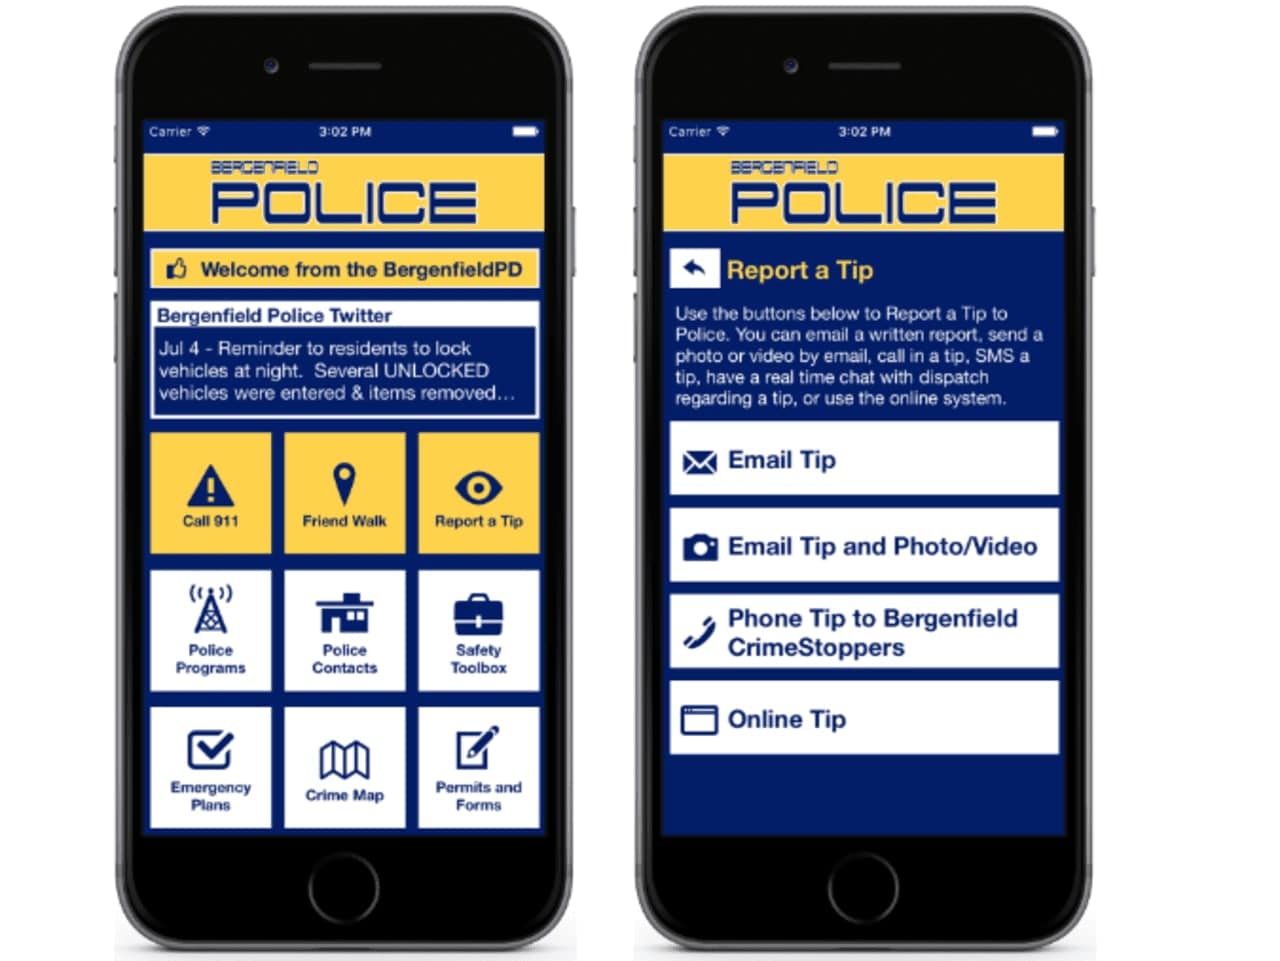 The Bergenfield police mobile safety app is available on the Apps Store and Google Play.